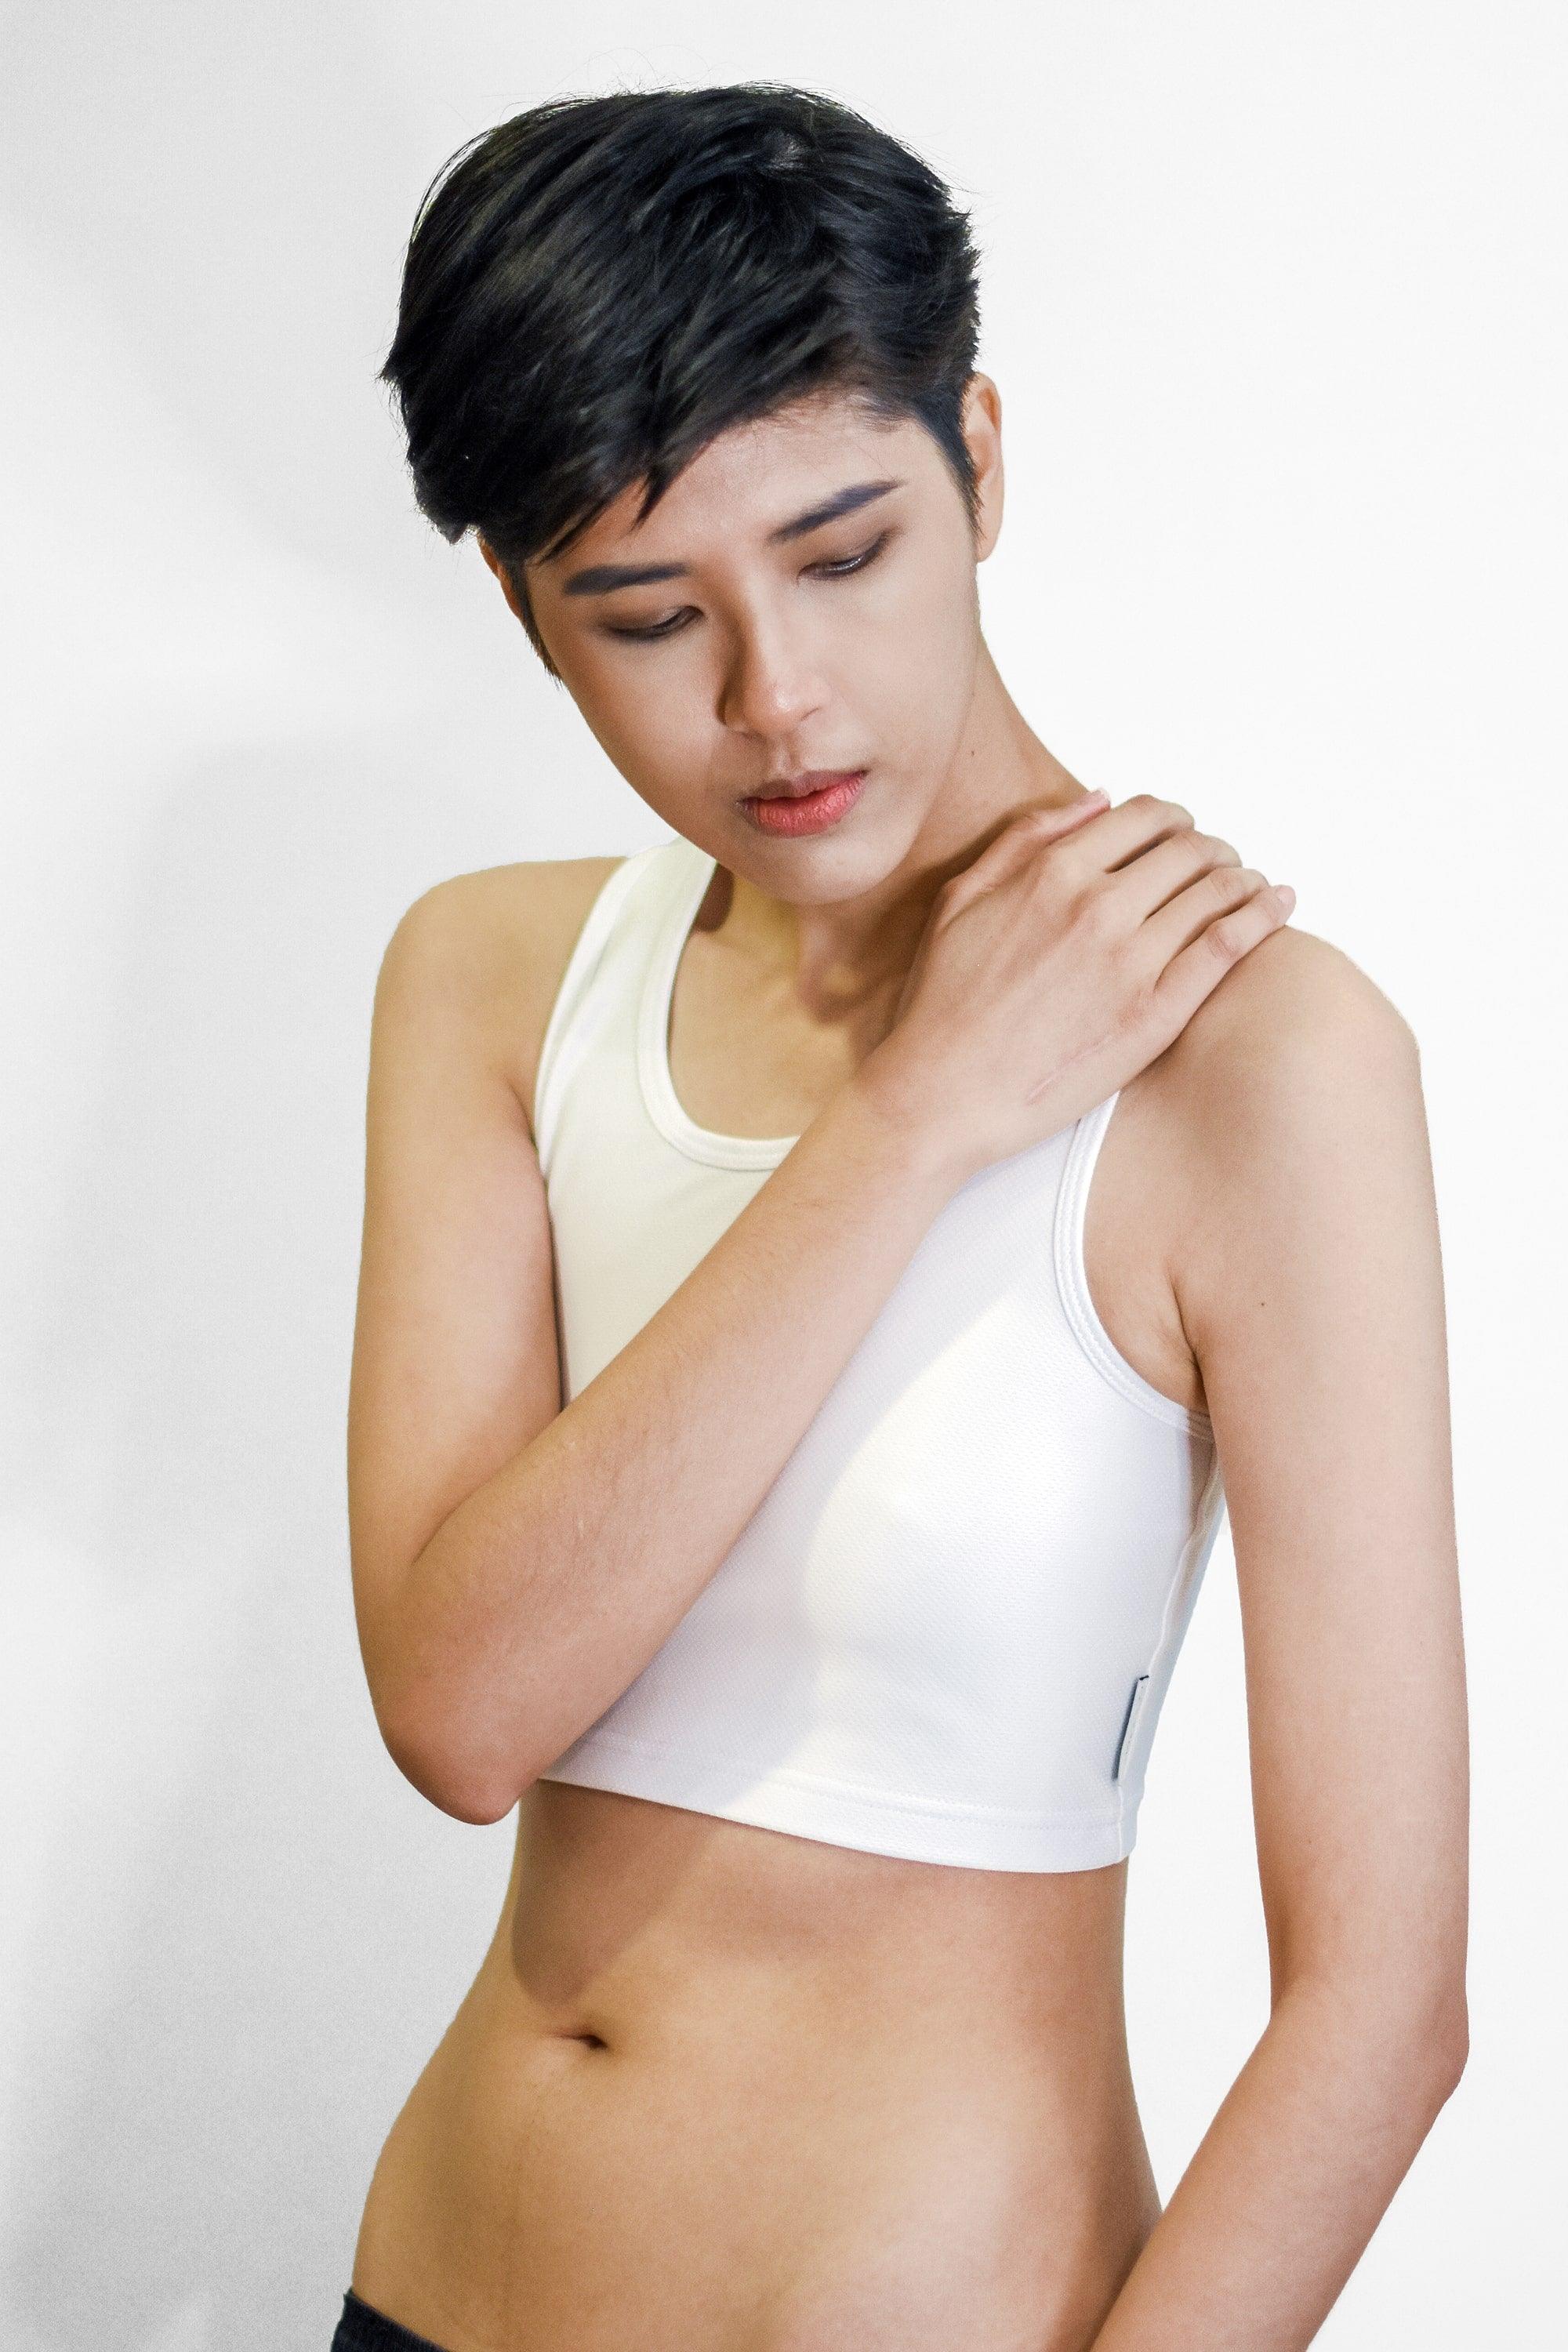 Non-binary Tomboy in a white color non-bandage TOMSCOUT Chest Binder, part of the TOMSCOUT ACTIVE BINDER collection, showcasing a clearance binder that's affordable yet high quality.